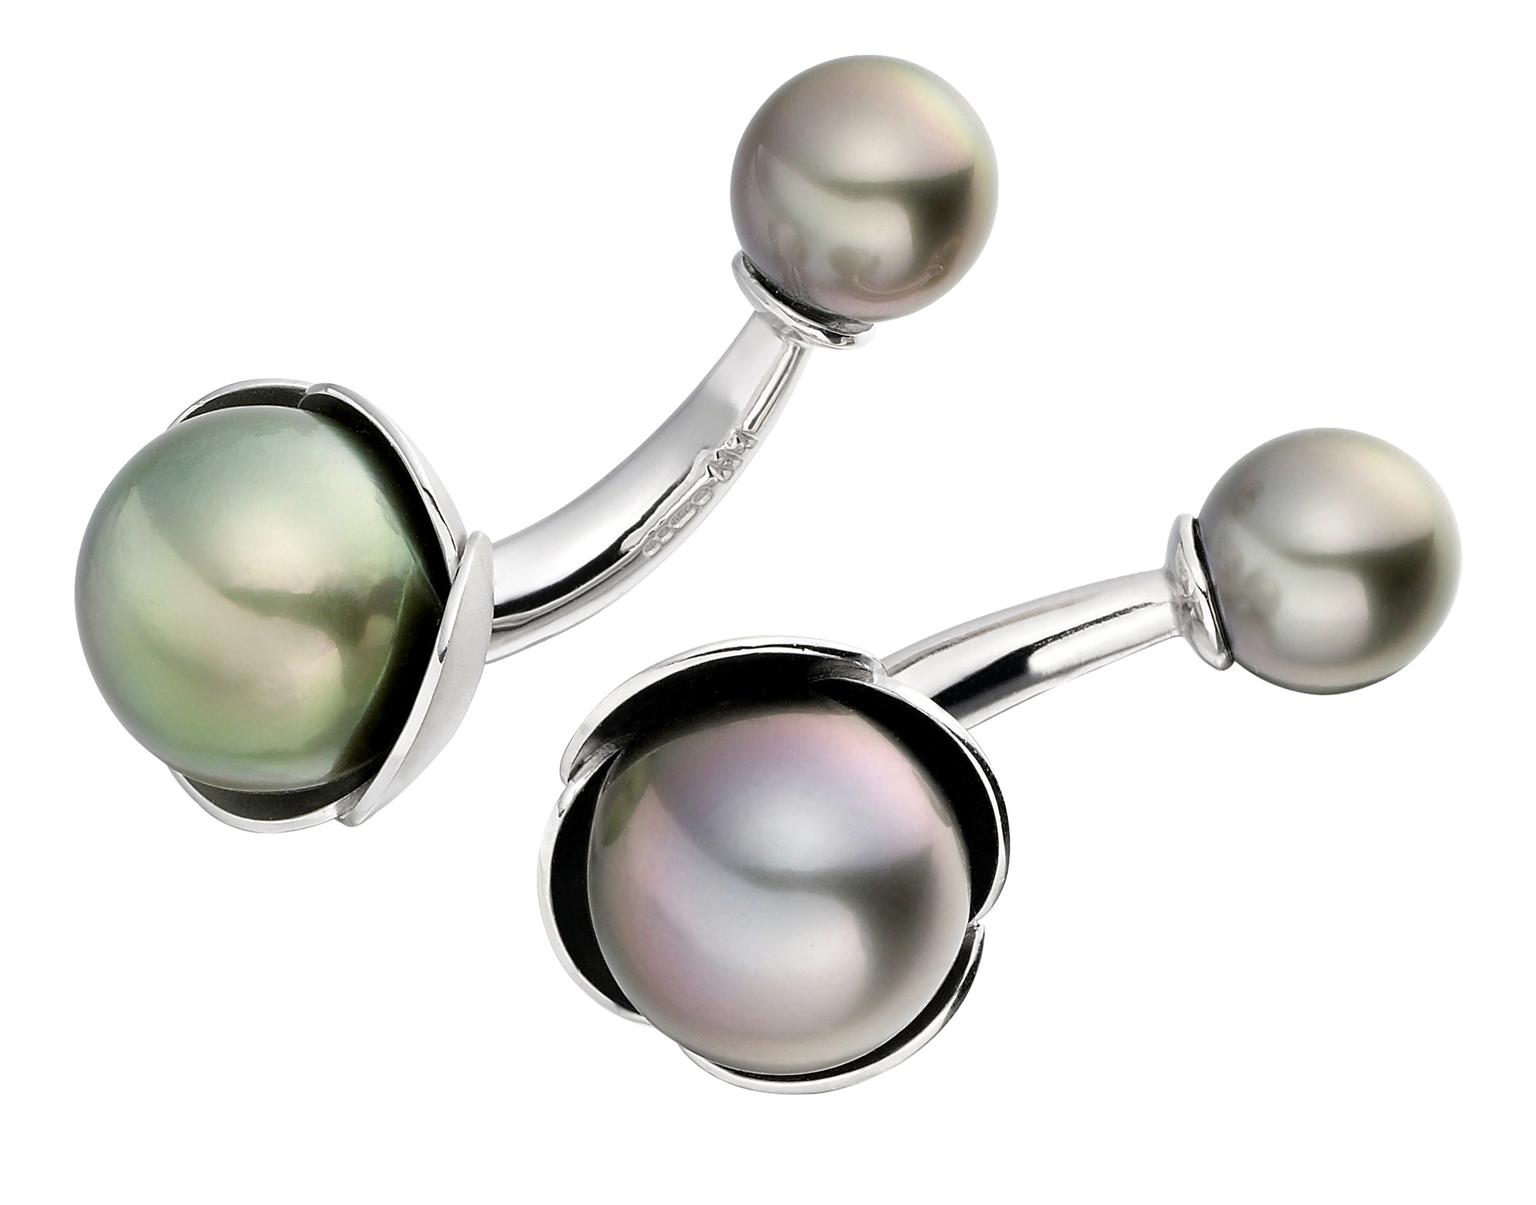 Lilly Hastedt Pearl Bud Cufflinks_20140505_Zoom